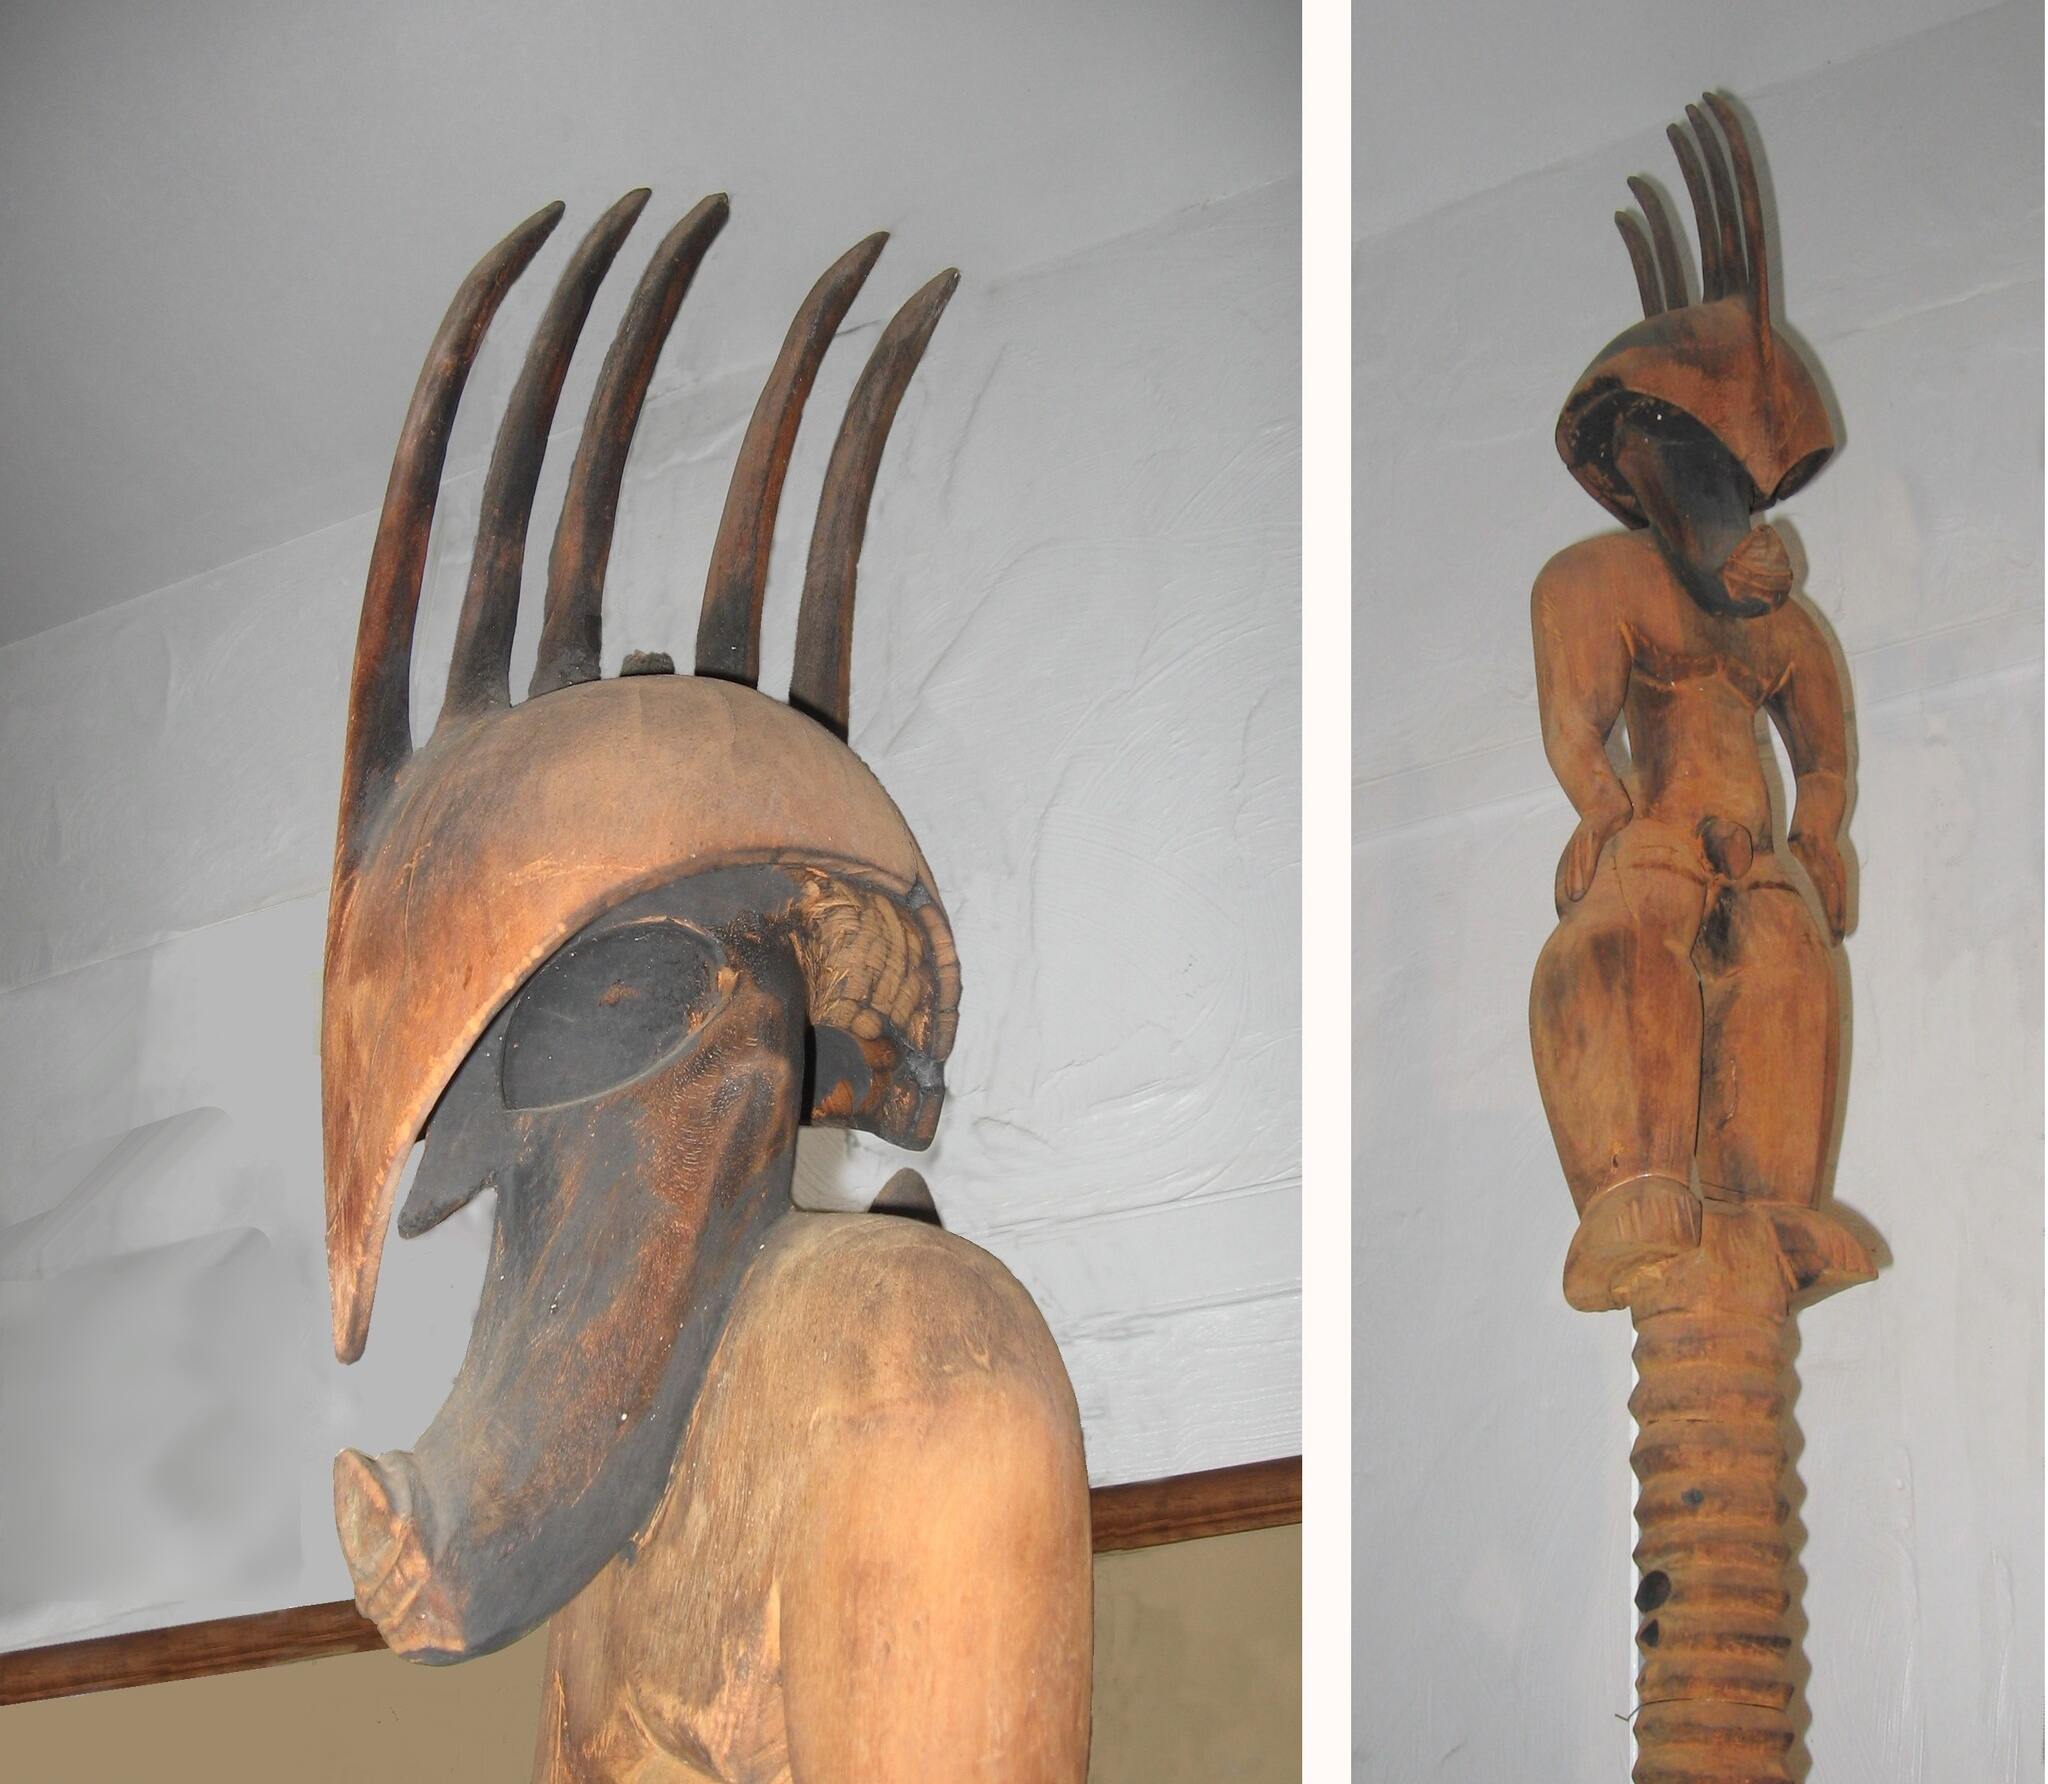 A collage of a wooden statue of the Ancient Hawaiian demi-god Kampaua'a. From the w:en:Bailey House Museum